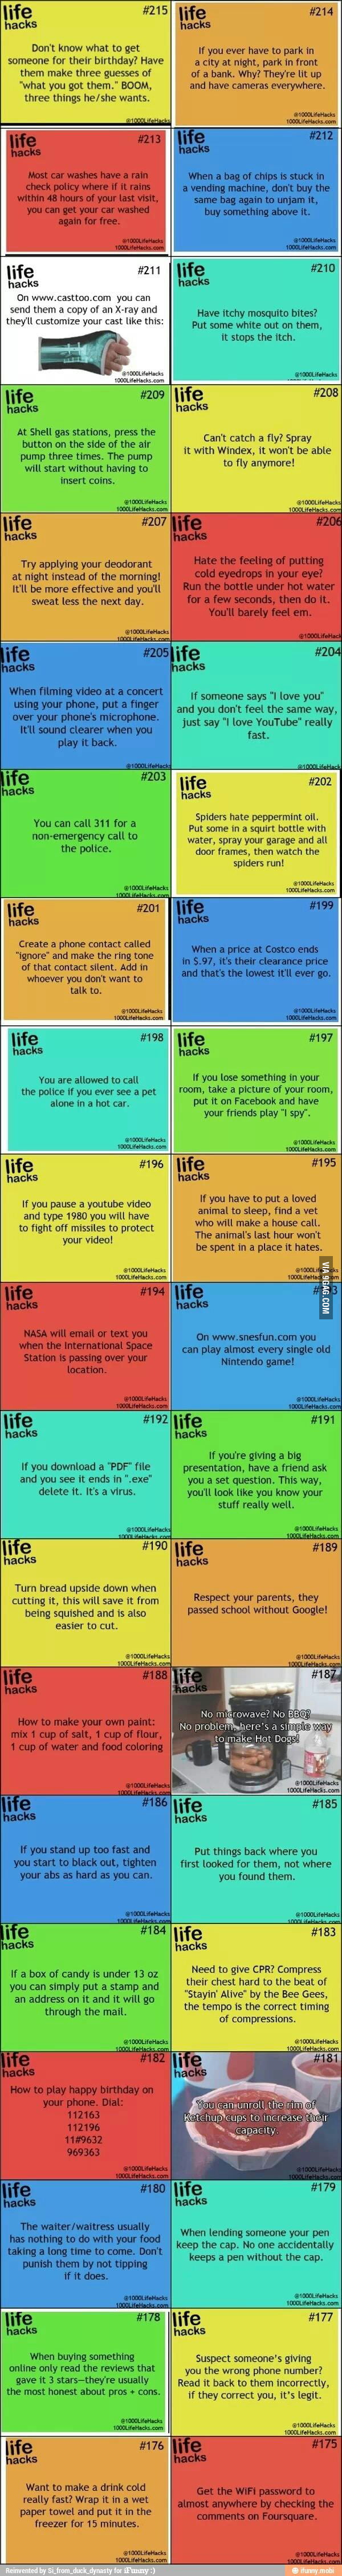 Facts... - 9GAG